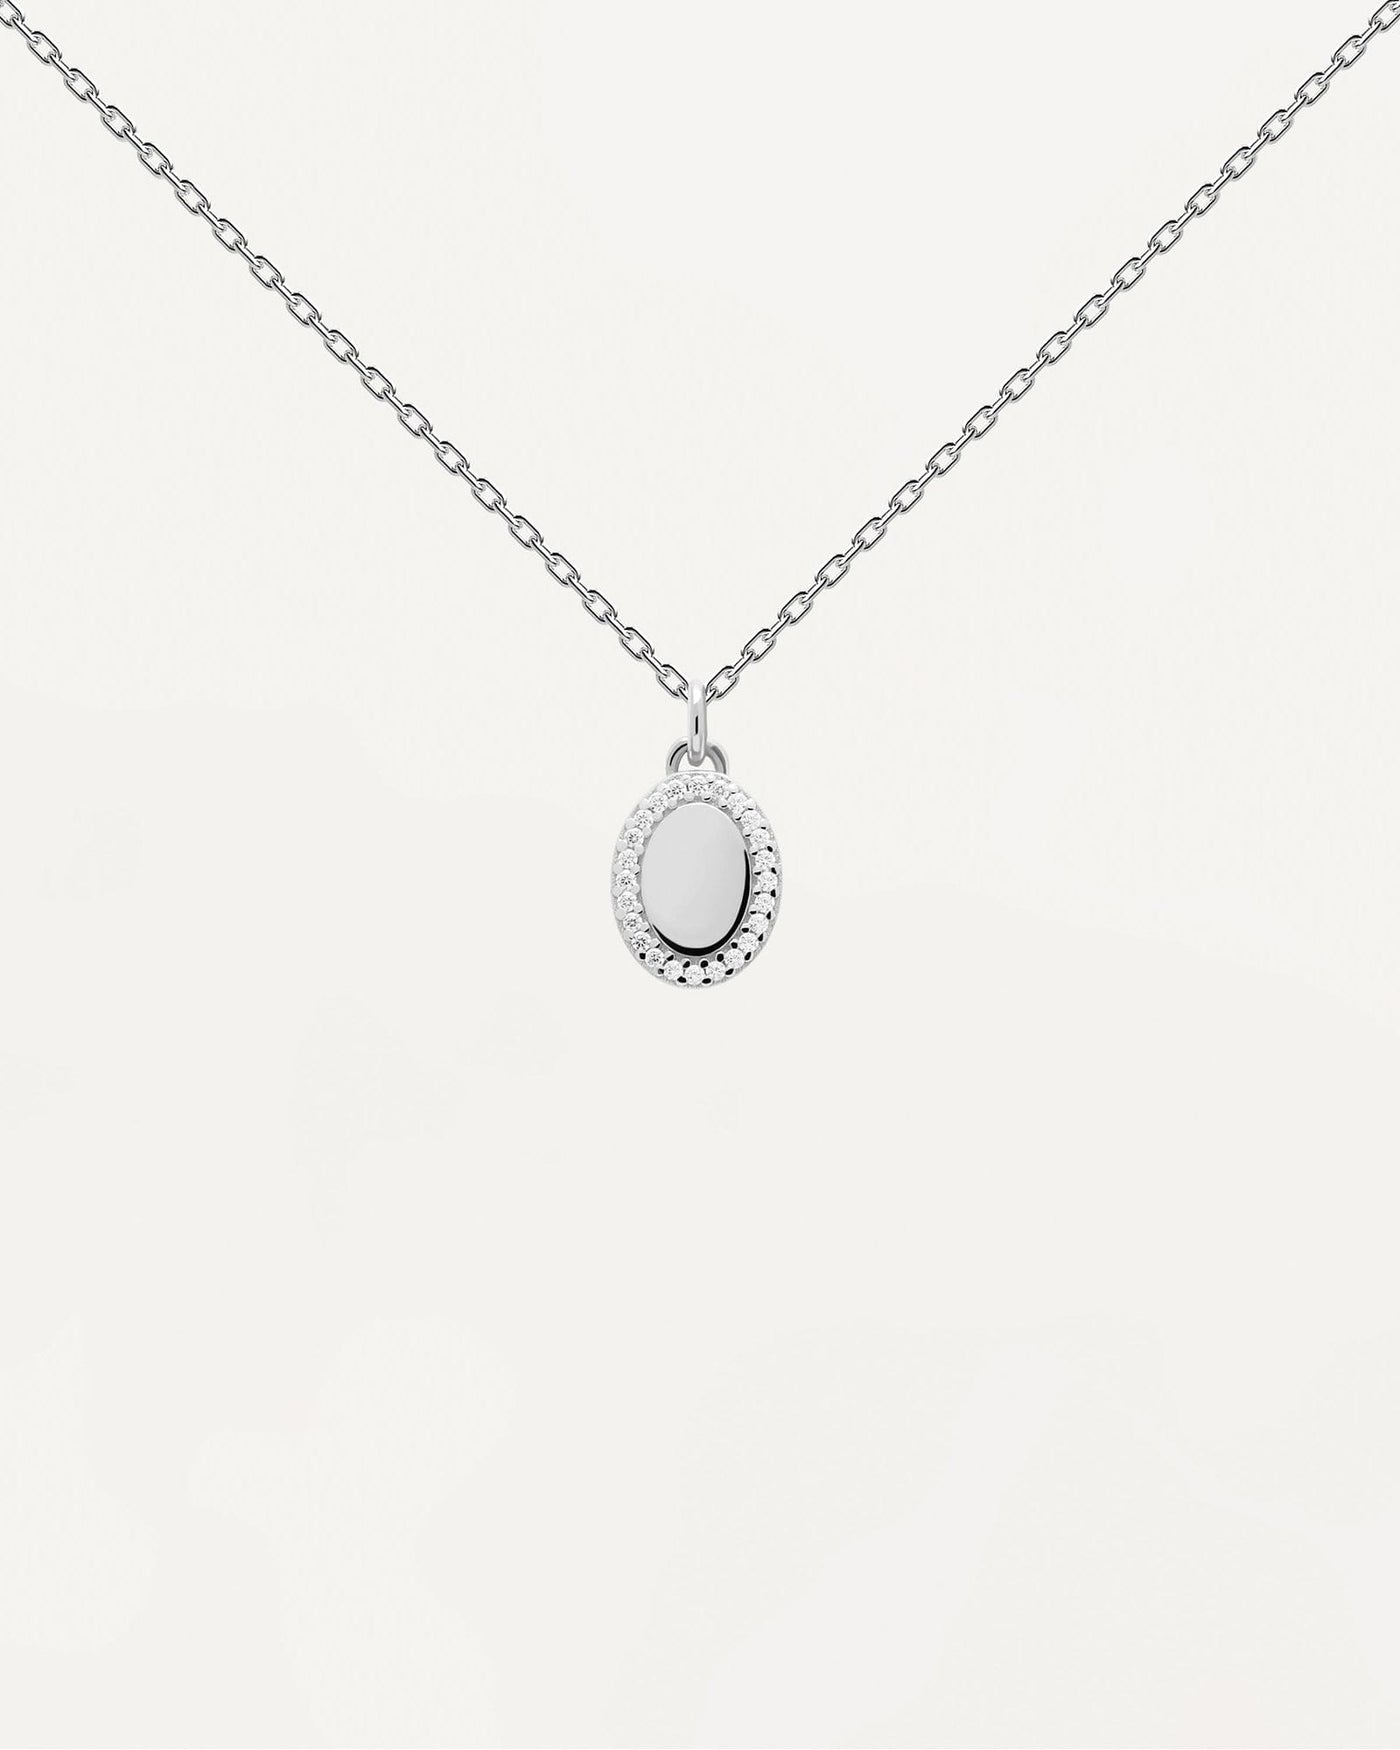 2024 Selection | Mademoiselle Silver Necklace. Sterling silver necklace with pendant circled by white zirconia to personalize. Get the latest arrival from PDPAOLA. Place your order safely and get this Best Seller. Free Shipping.